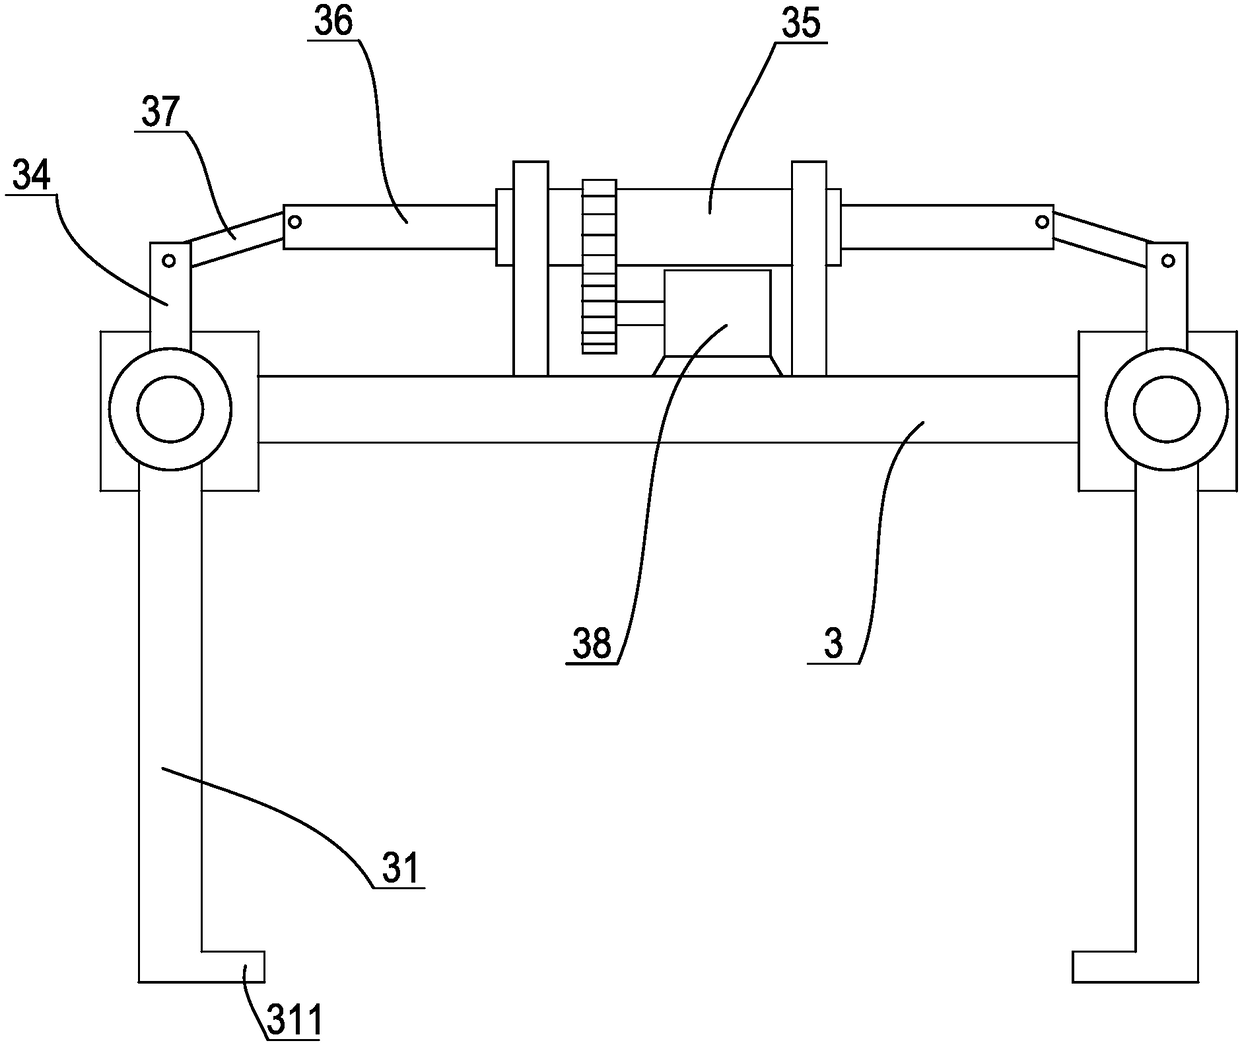 An engine assembly transfer device